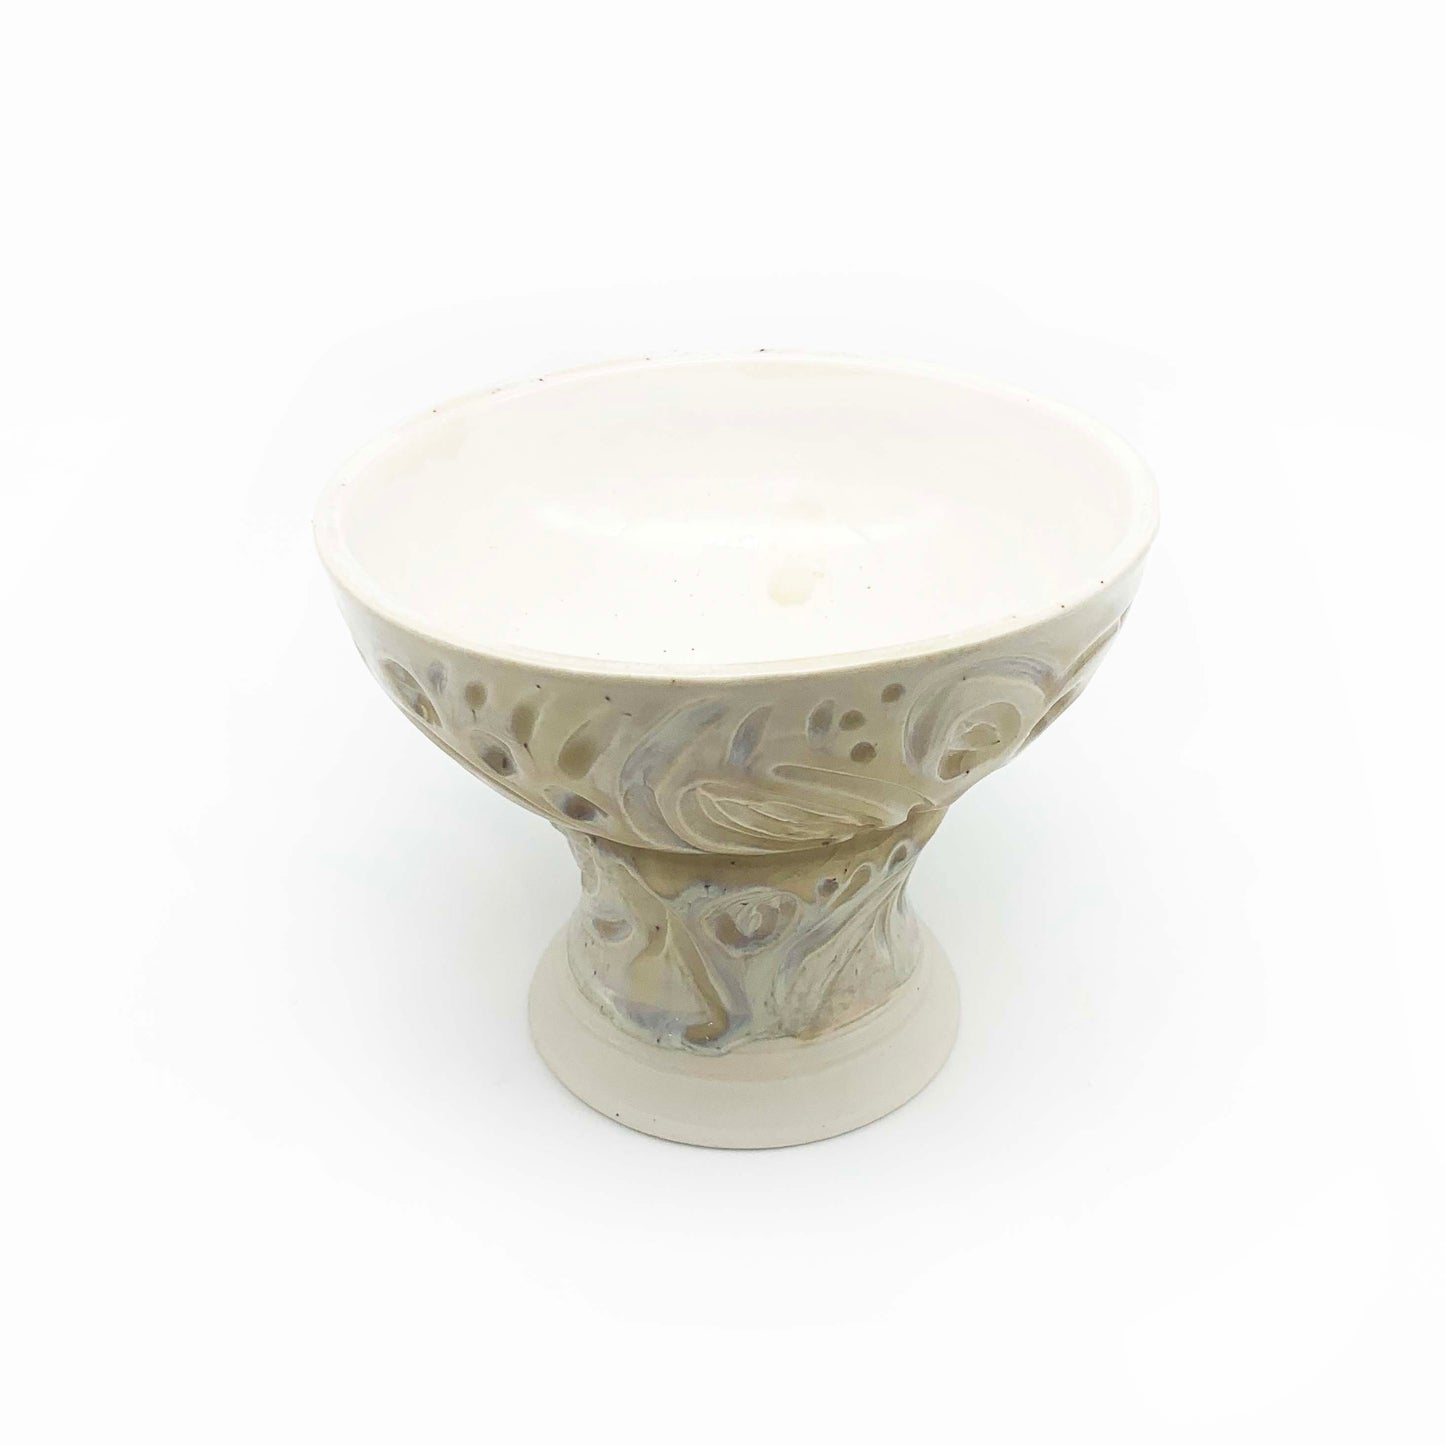 A Drink Well Collection : Iridescent Footed Bowl - Small